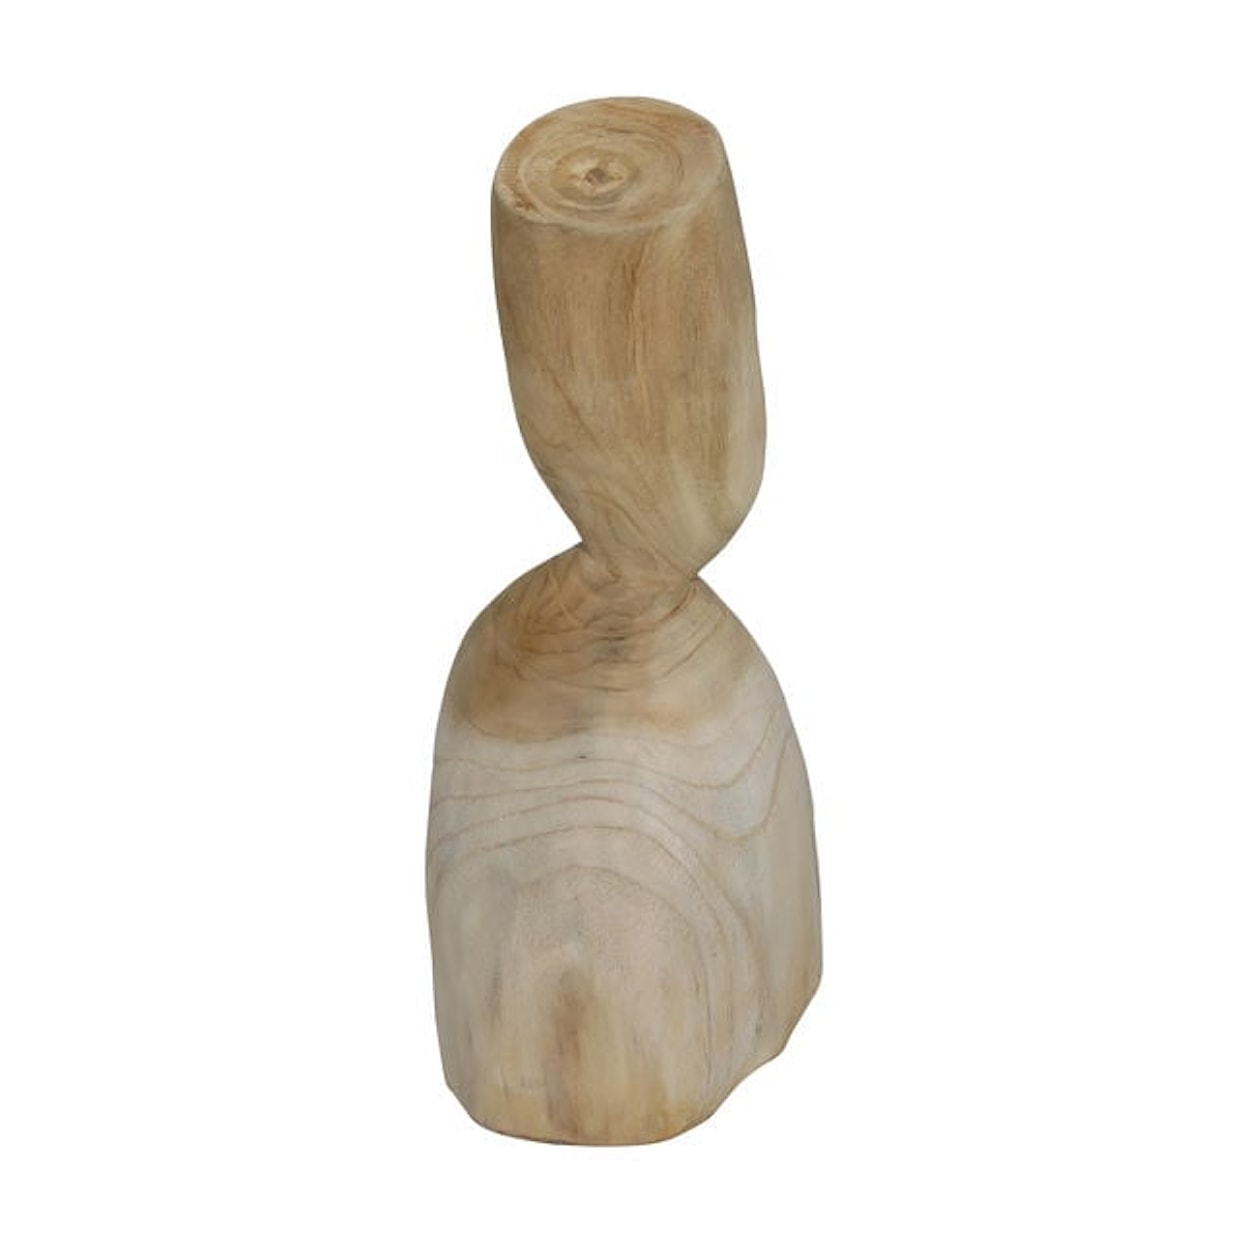 Dovetail Furniture Dovetail Accessories Layman Wood Sculpture